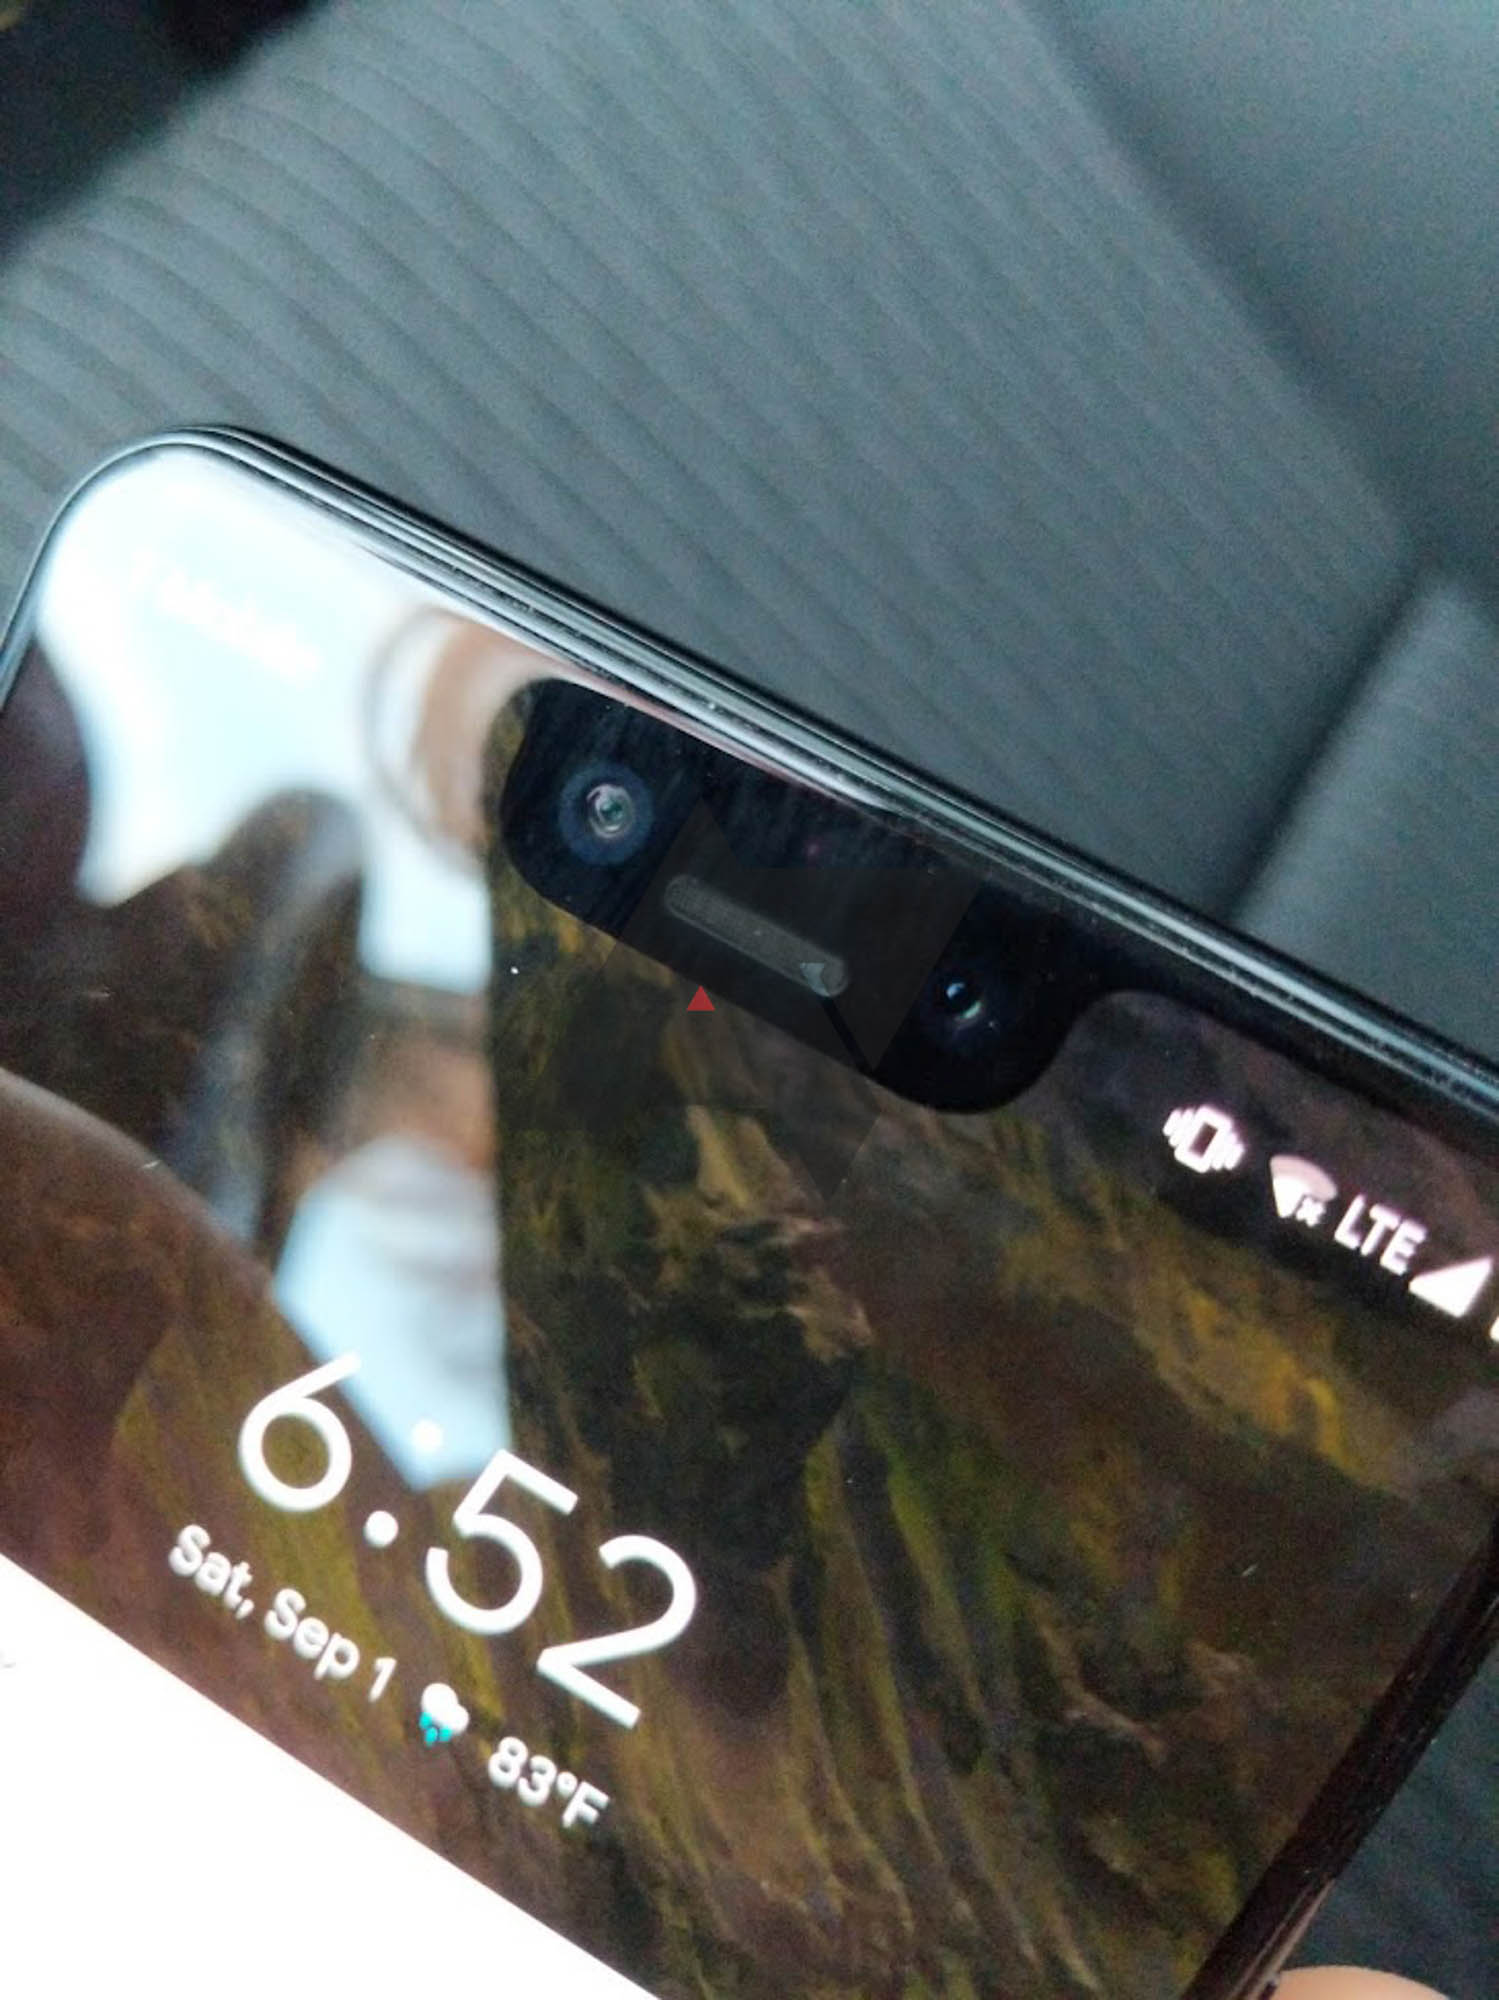 Live photos of Google Pixel 3 XL leaks again, this time it's from a Lyft driver